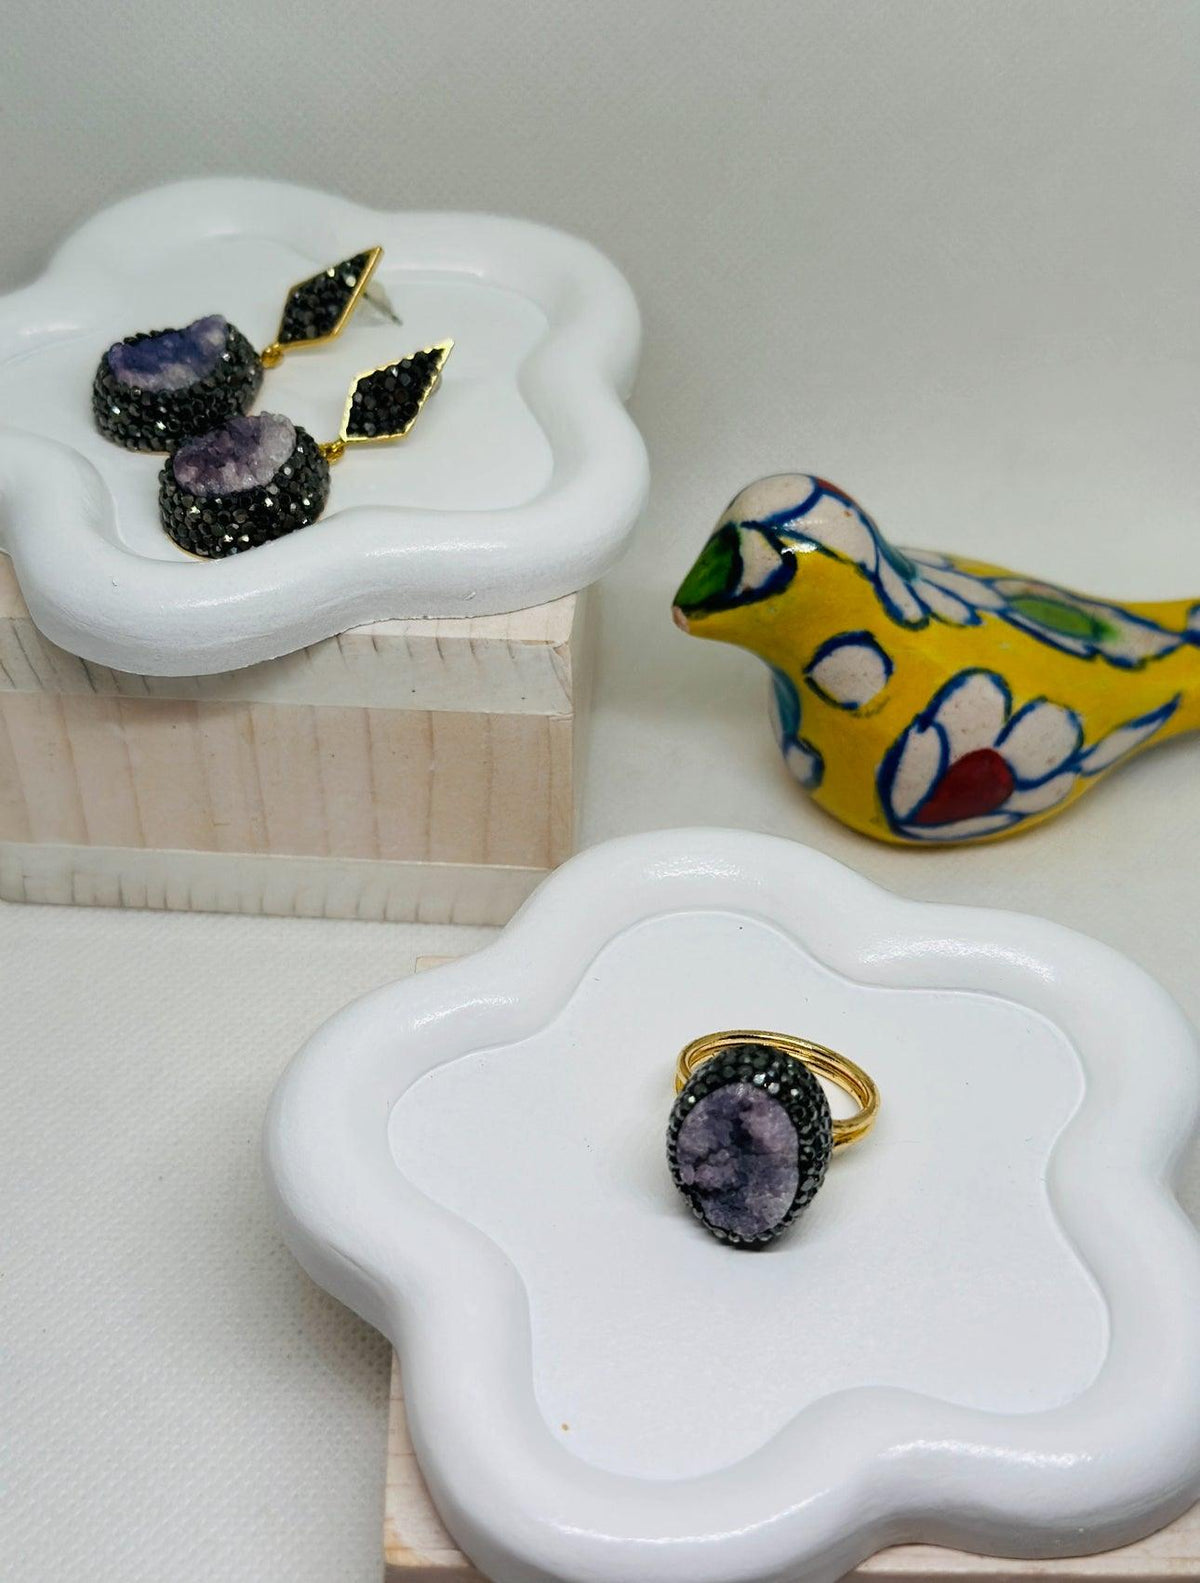 Diana Druzy Agate Set Earrings and Ring - Penelope Made This Inc.